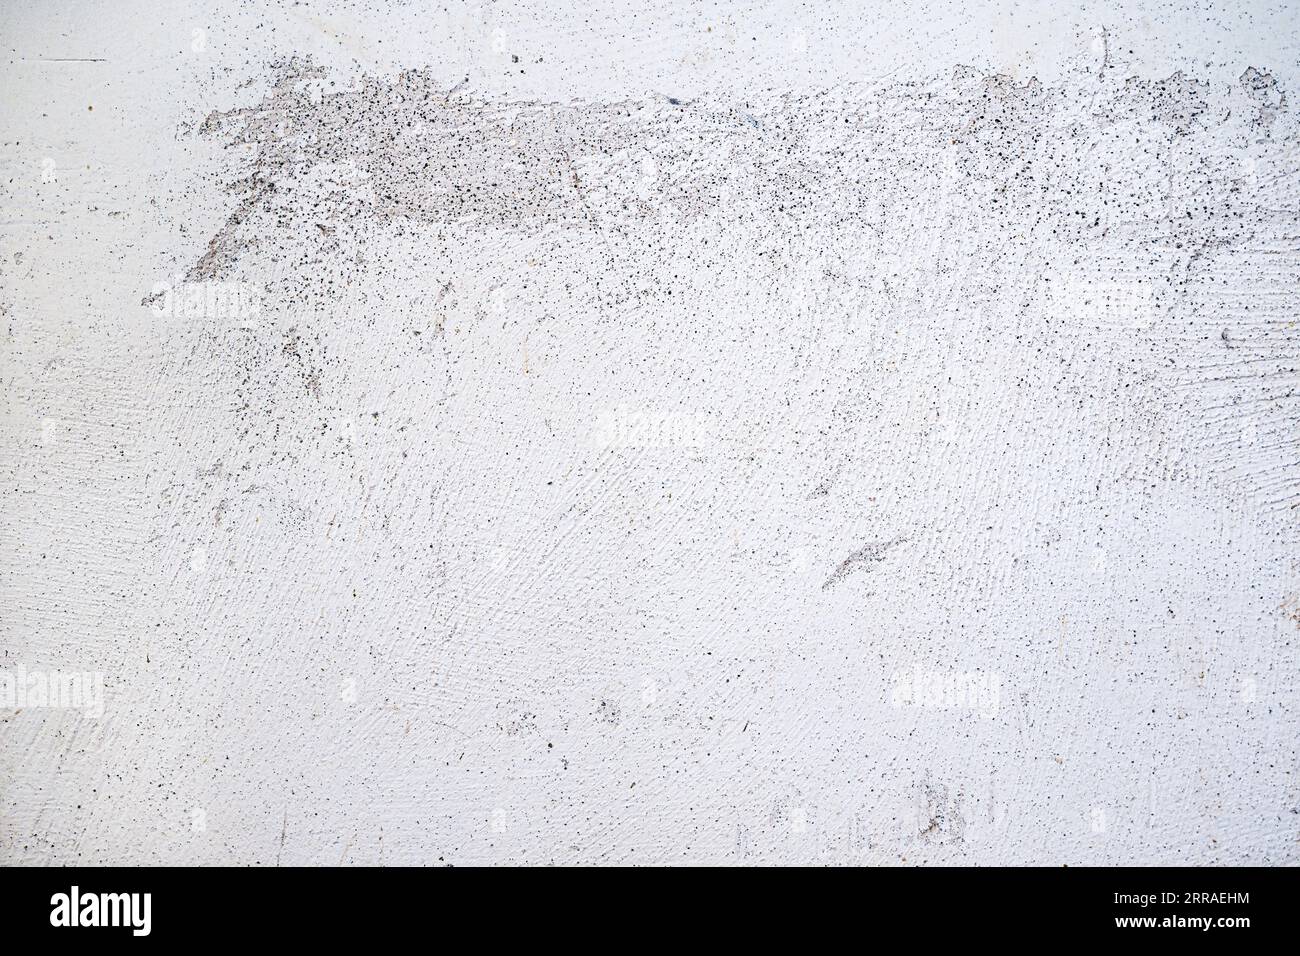 Plastered wall surface with rubbed off white paint, light gray background texture for urban themes or architecture, full frame, copy space Stock Photo